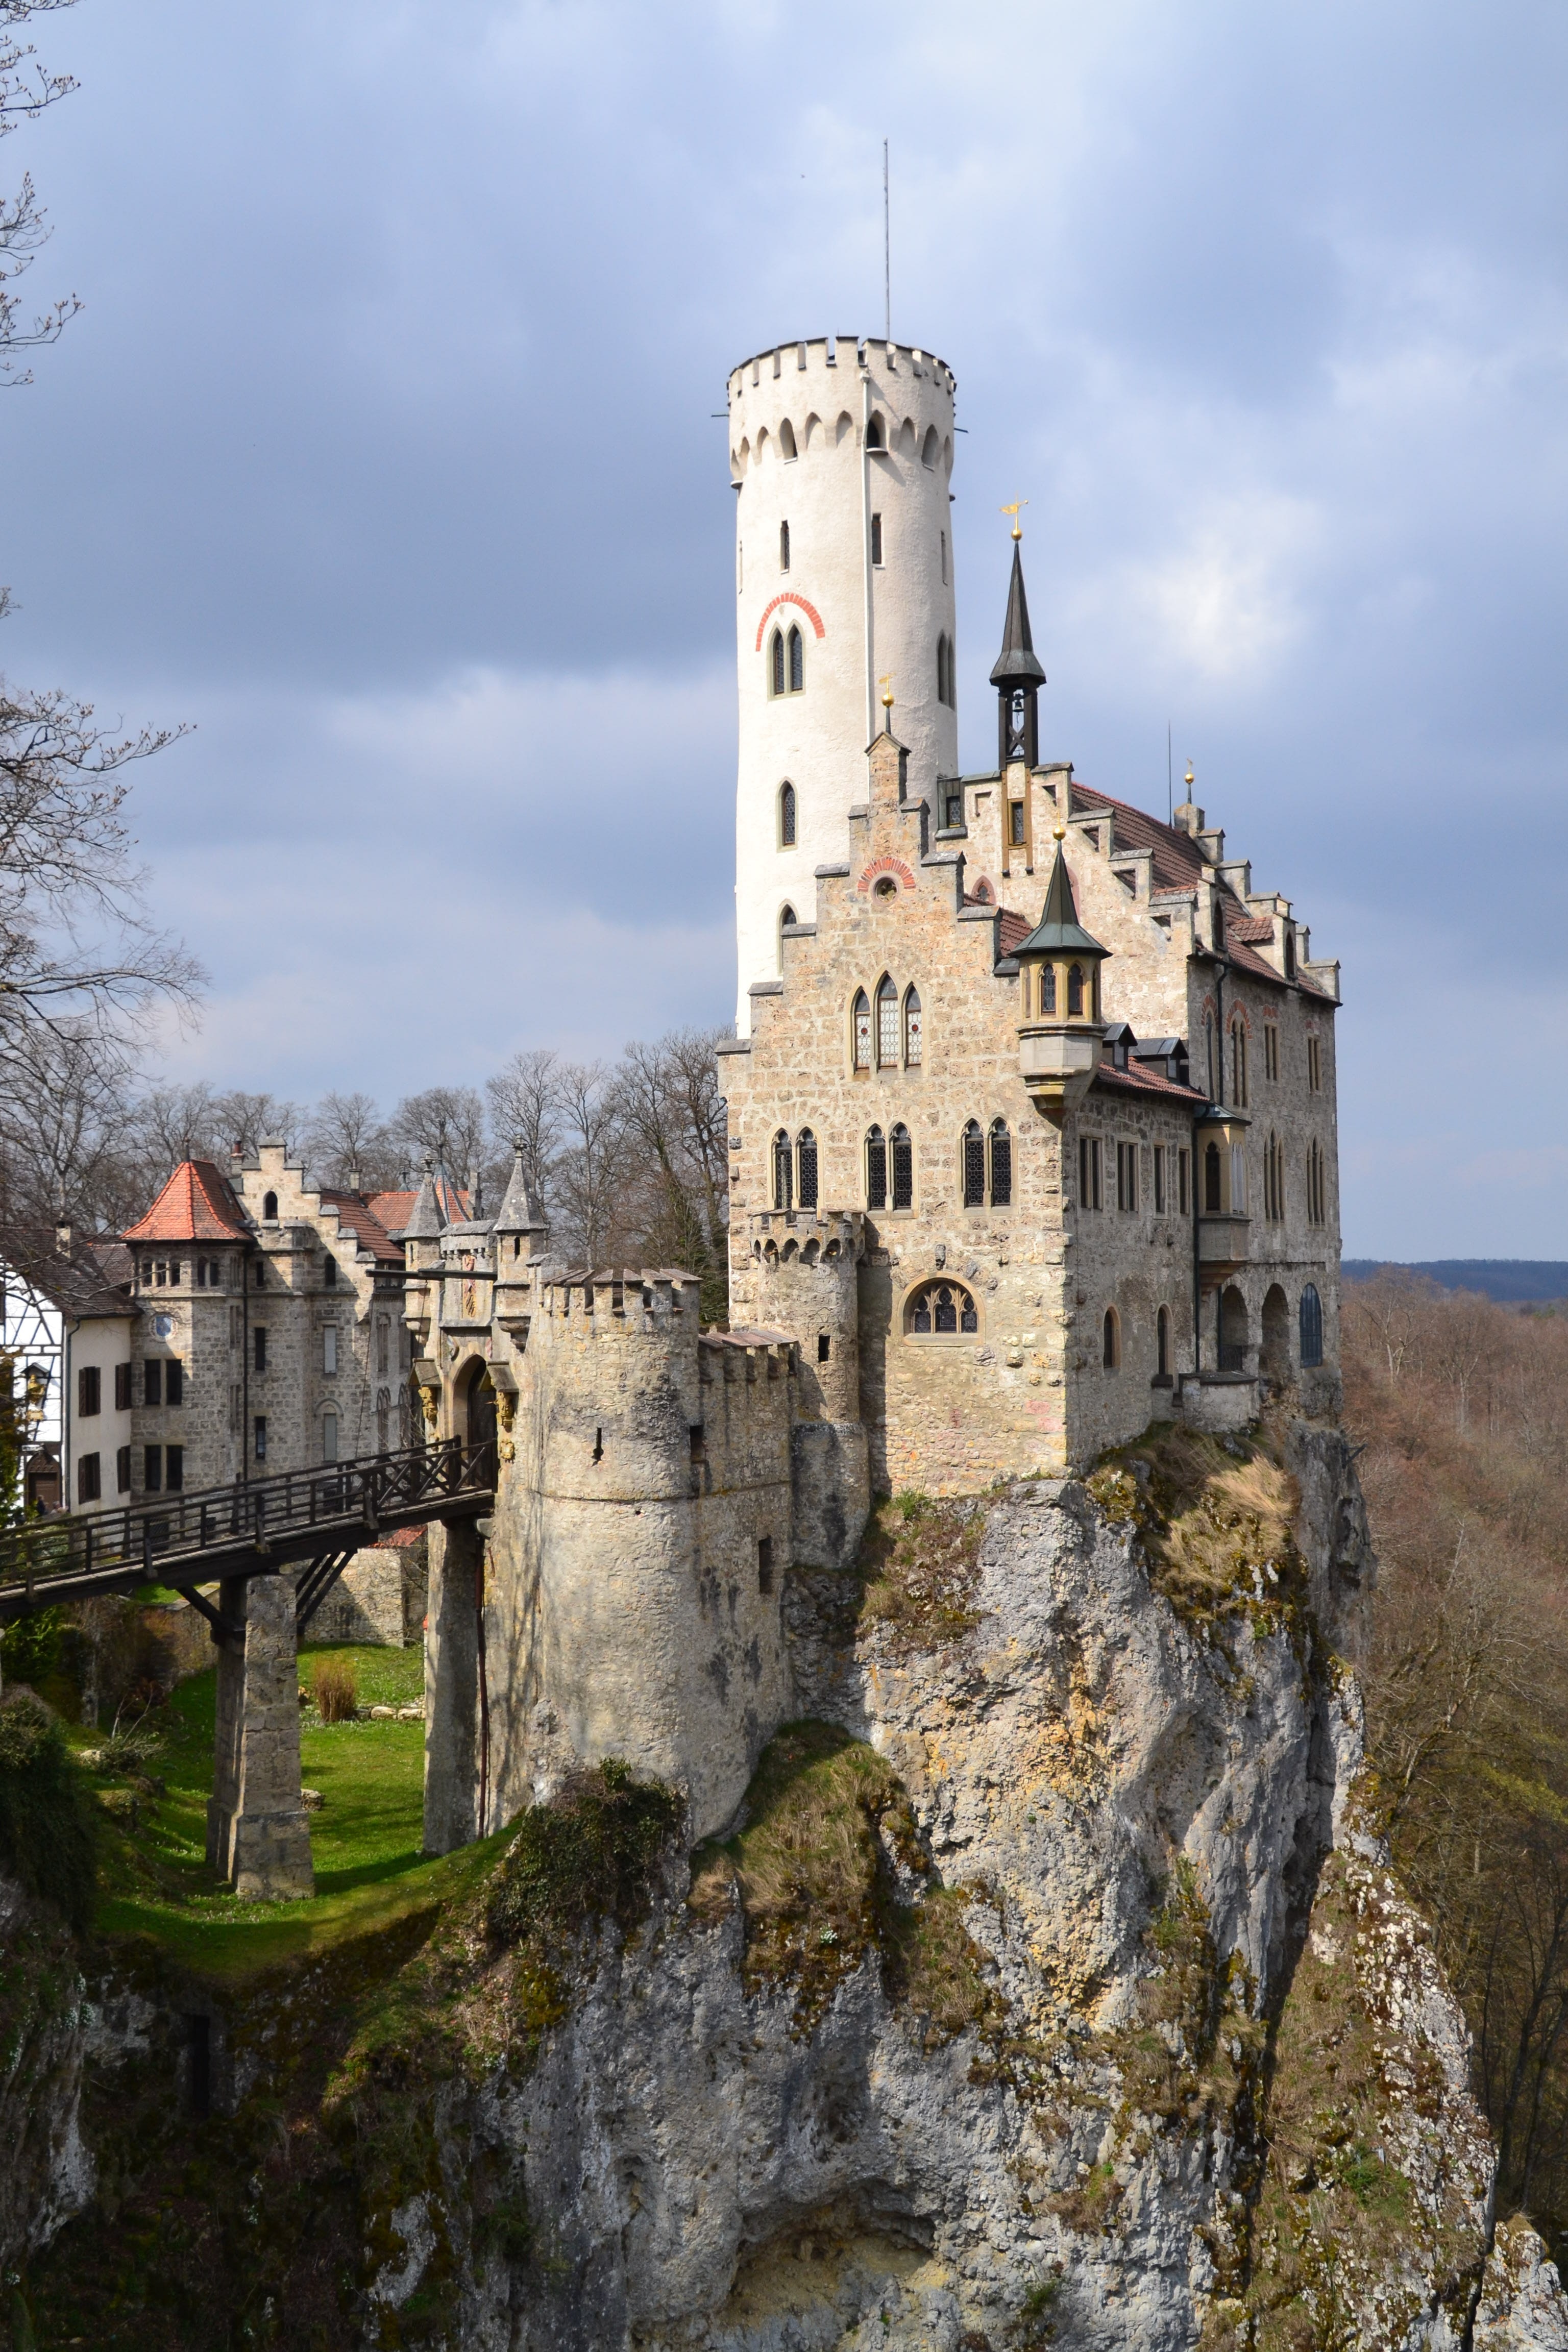 Gray and White Castle Built Near a Cliff, Ancient, Landmark, Tower, Tourism, HQ Photo